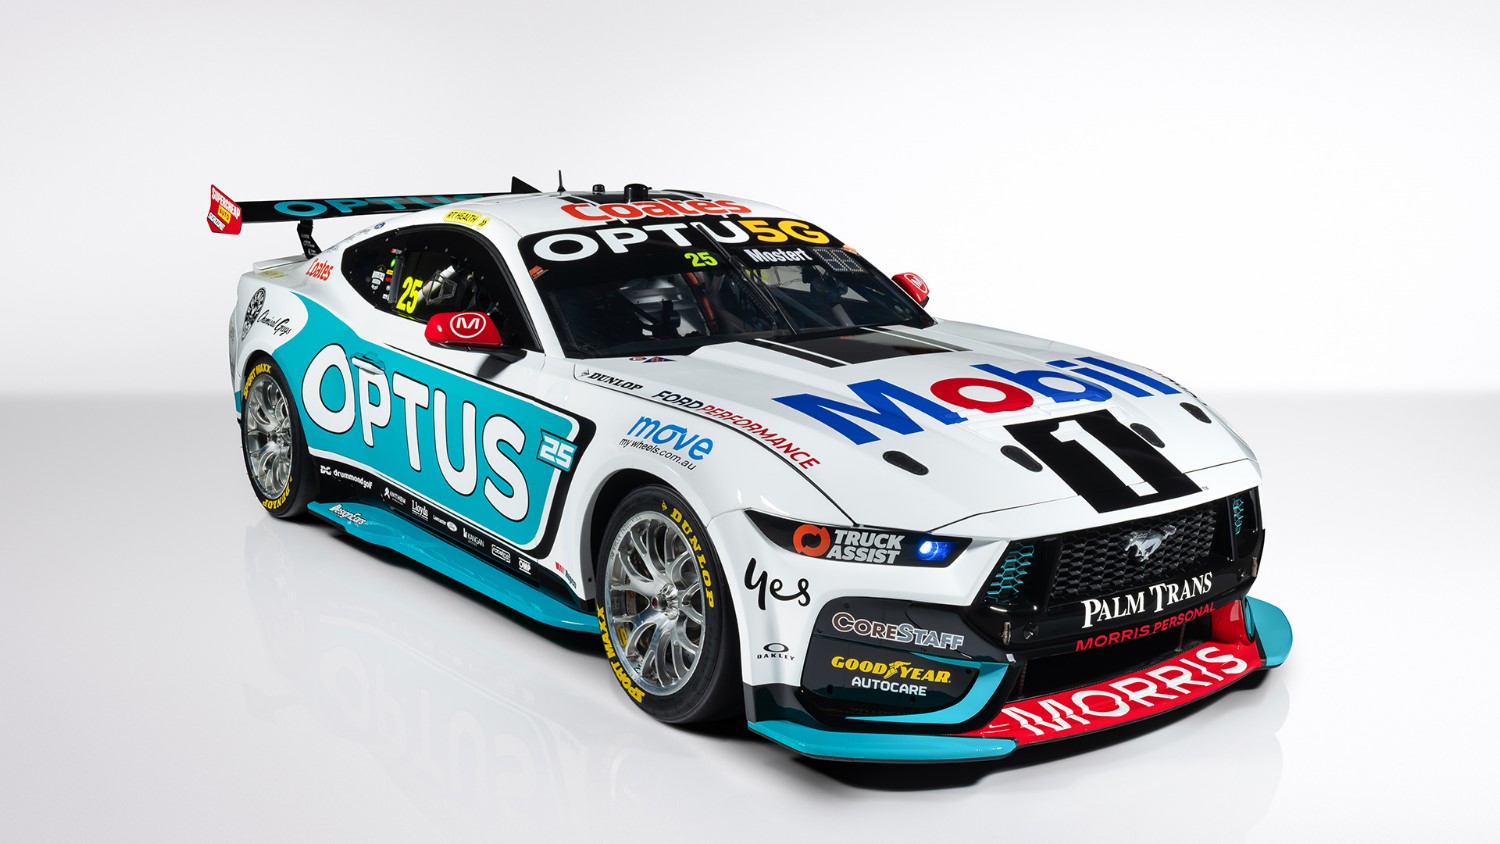 The livery for Chaz Mostert's WAU Mobil 1 Optus Racing No. 25 Ford Mustang. Image: Supplied